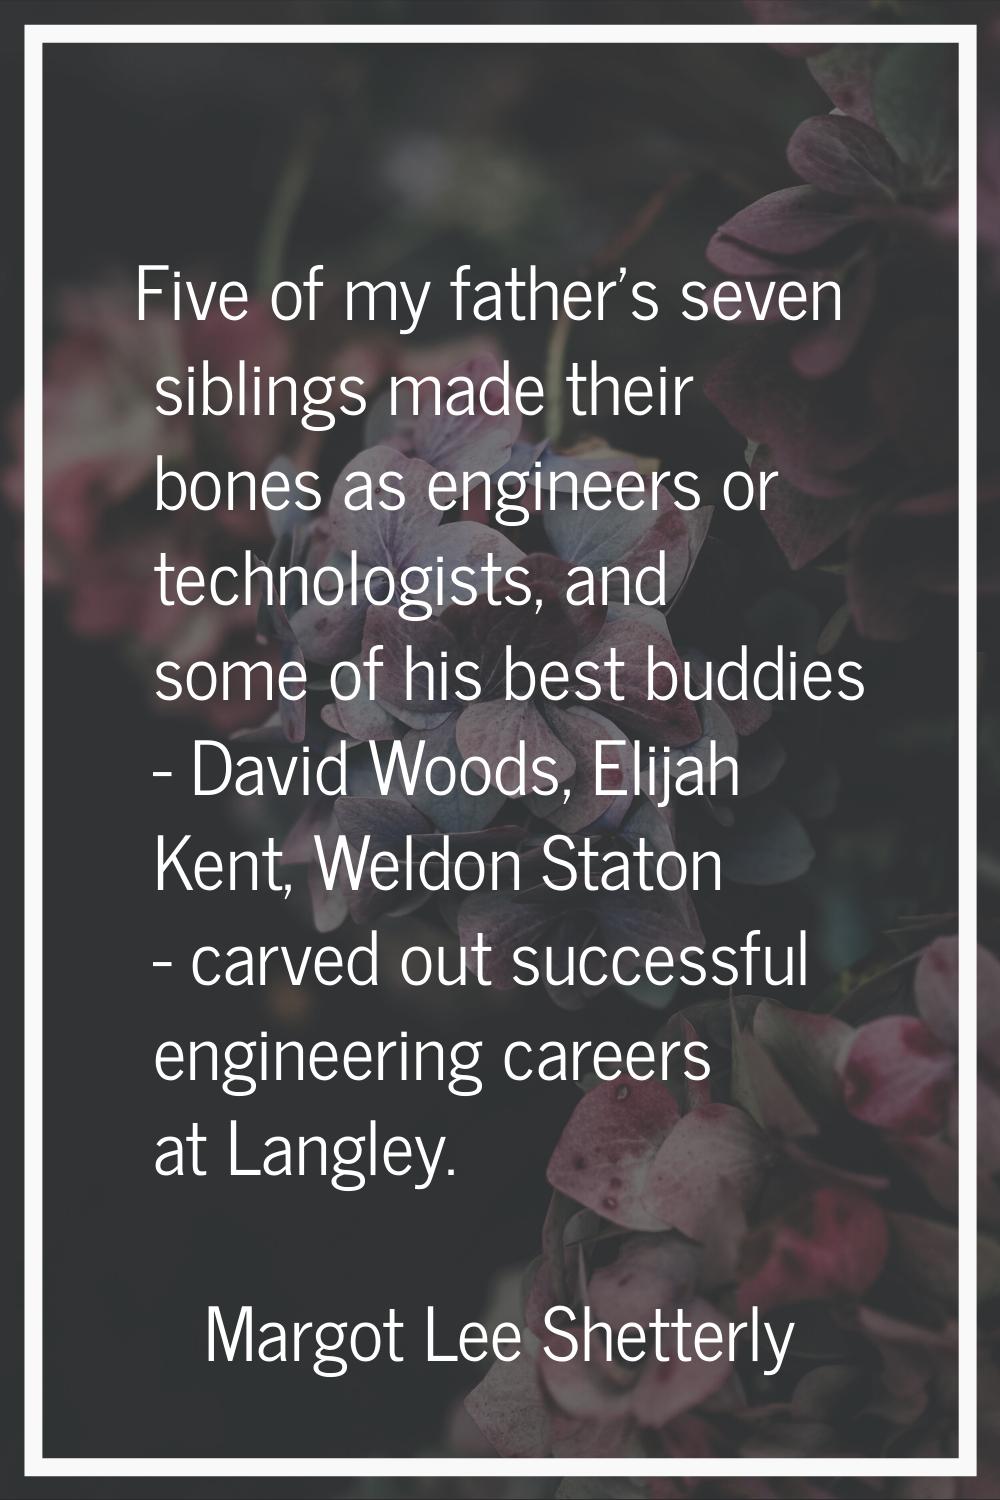 Five of my father's seven siblings made their bones as engineers or technologists, and some of his 